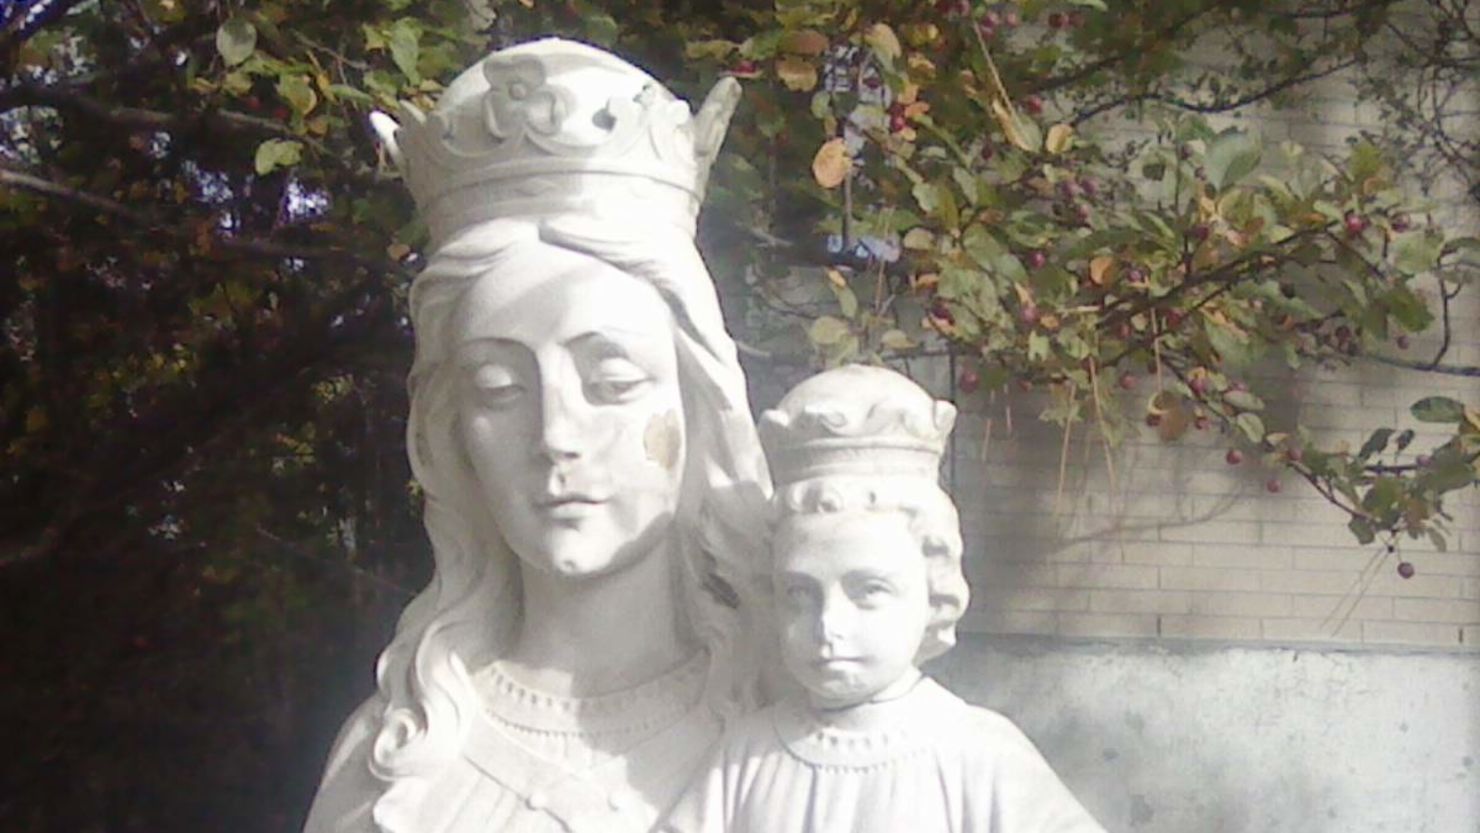 The original stone head of baby Jesus head sits atop the statue. A temporary head, crafted by a local artist, was earlier mocked on social media. The head "is now in a safe place until work is done," Father Gerald told CNN.